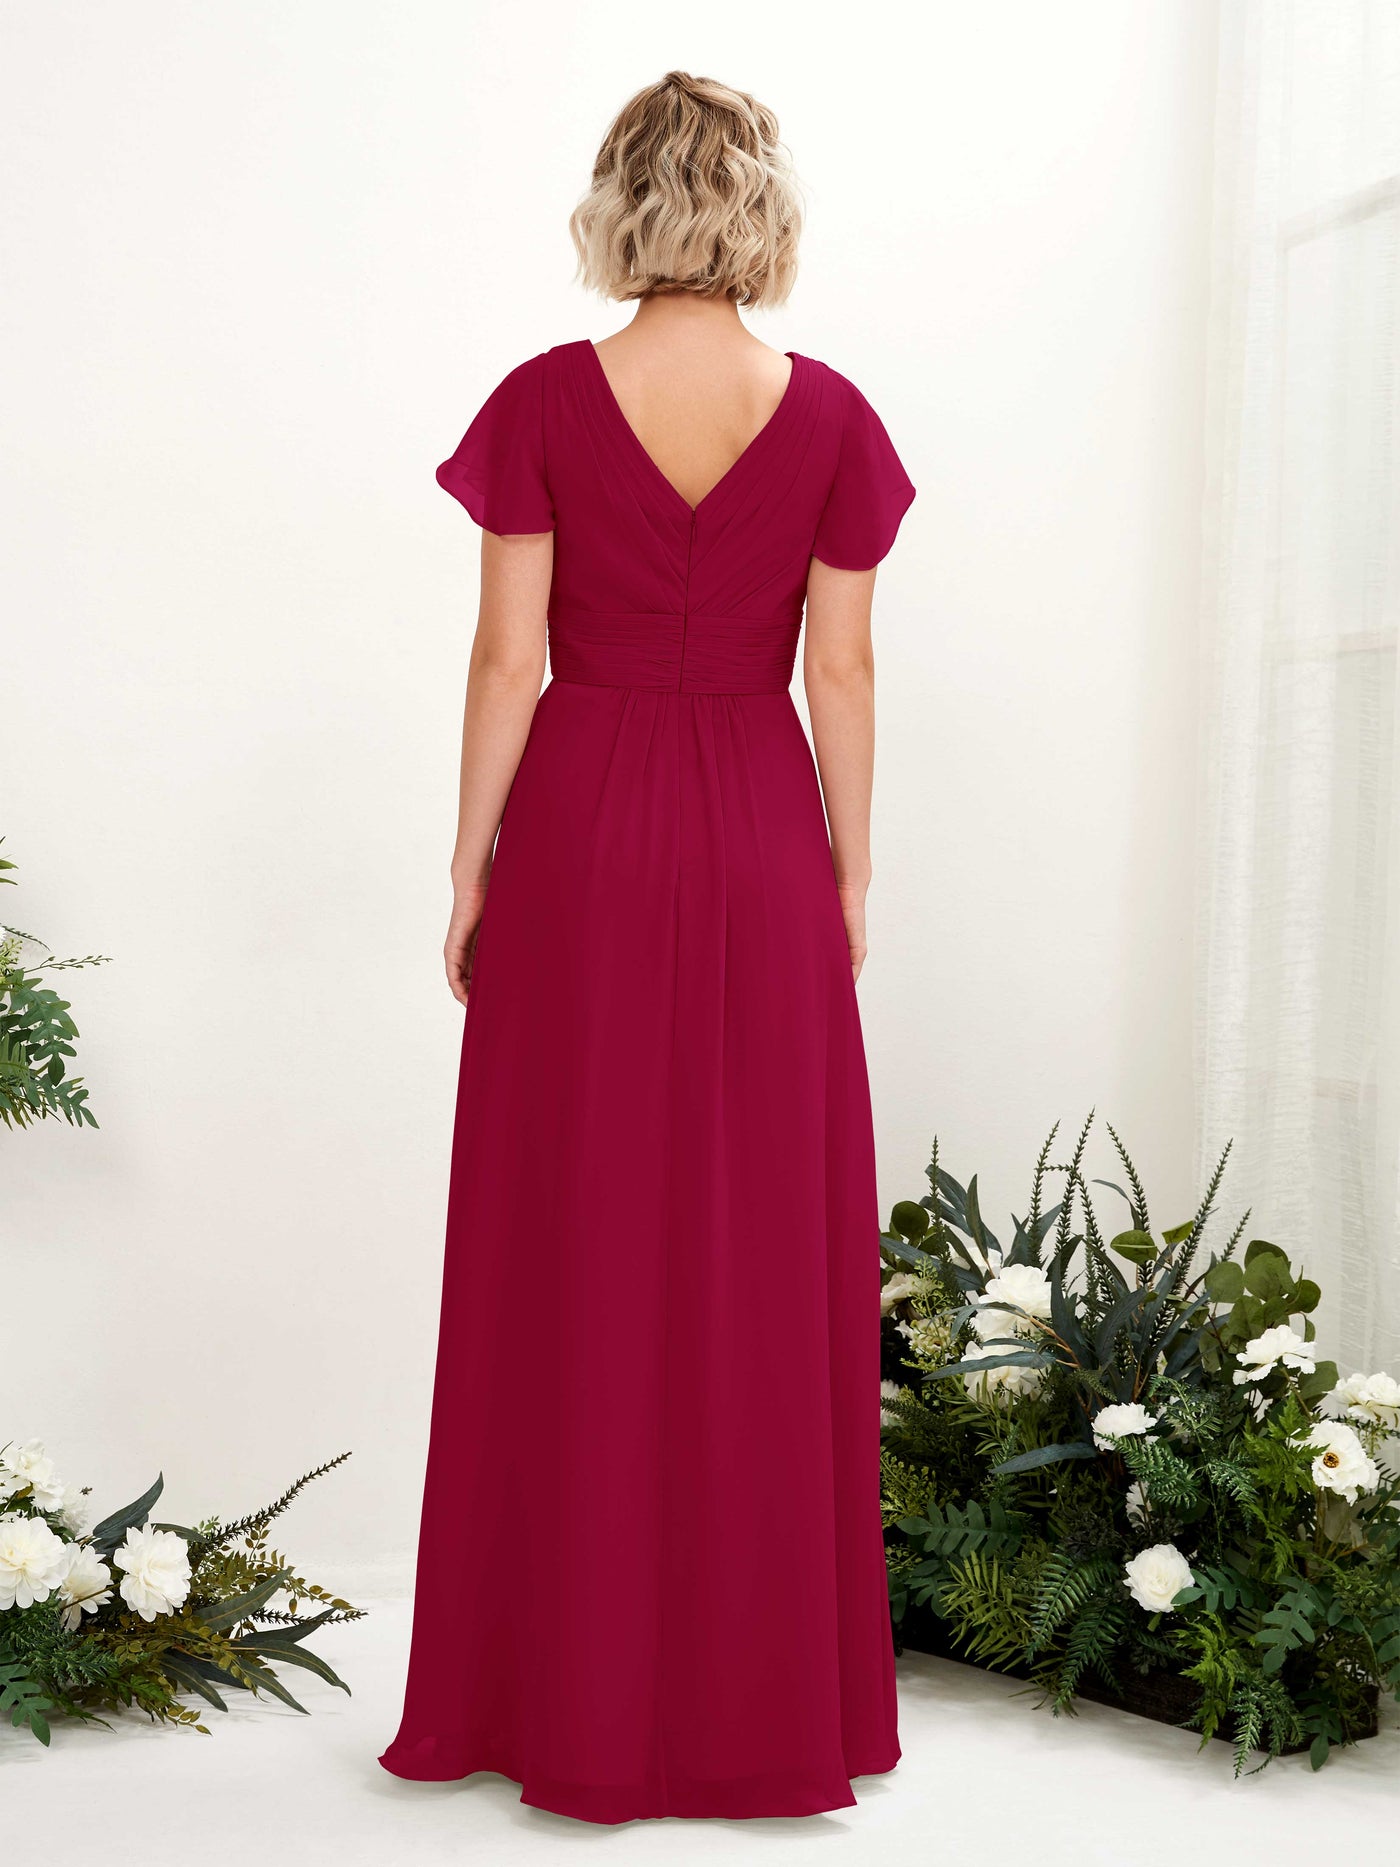 Jester Red Bridesmaid Dresses Bridesmaid Dress A-line Chiffon V-neck Full Length Short Sleeves Wedding Party Dress (81224341)#color_jester-red